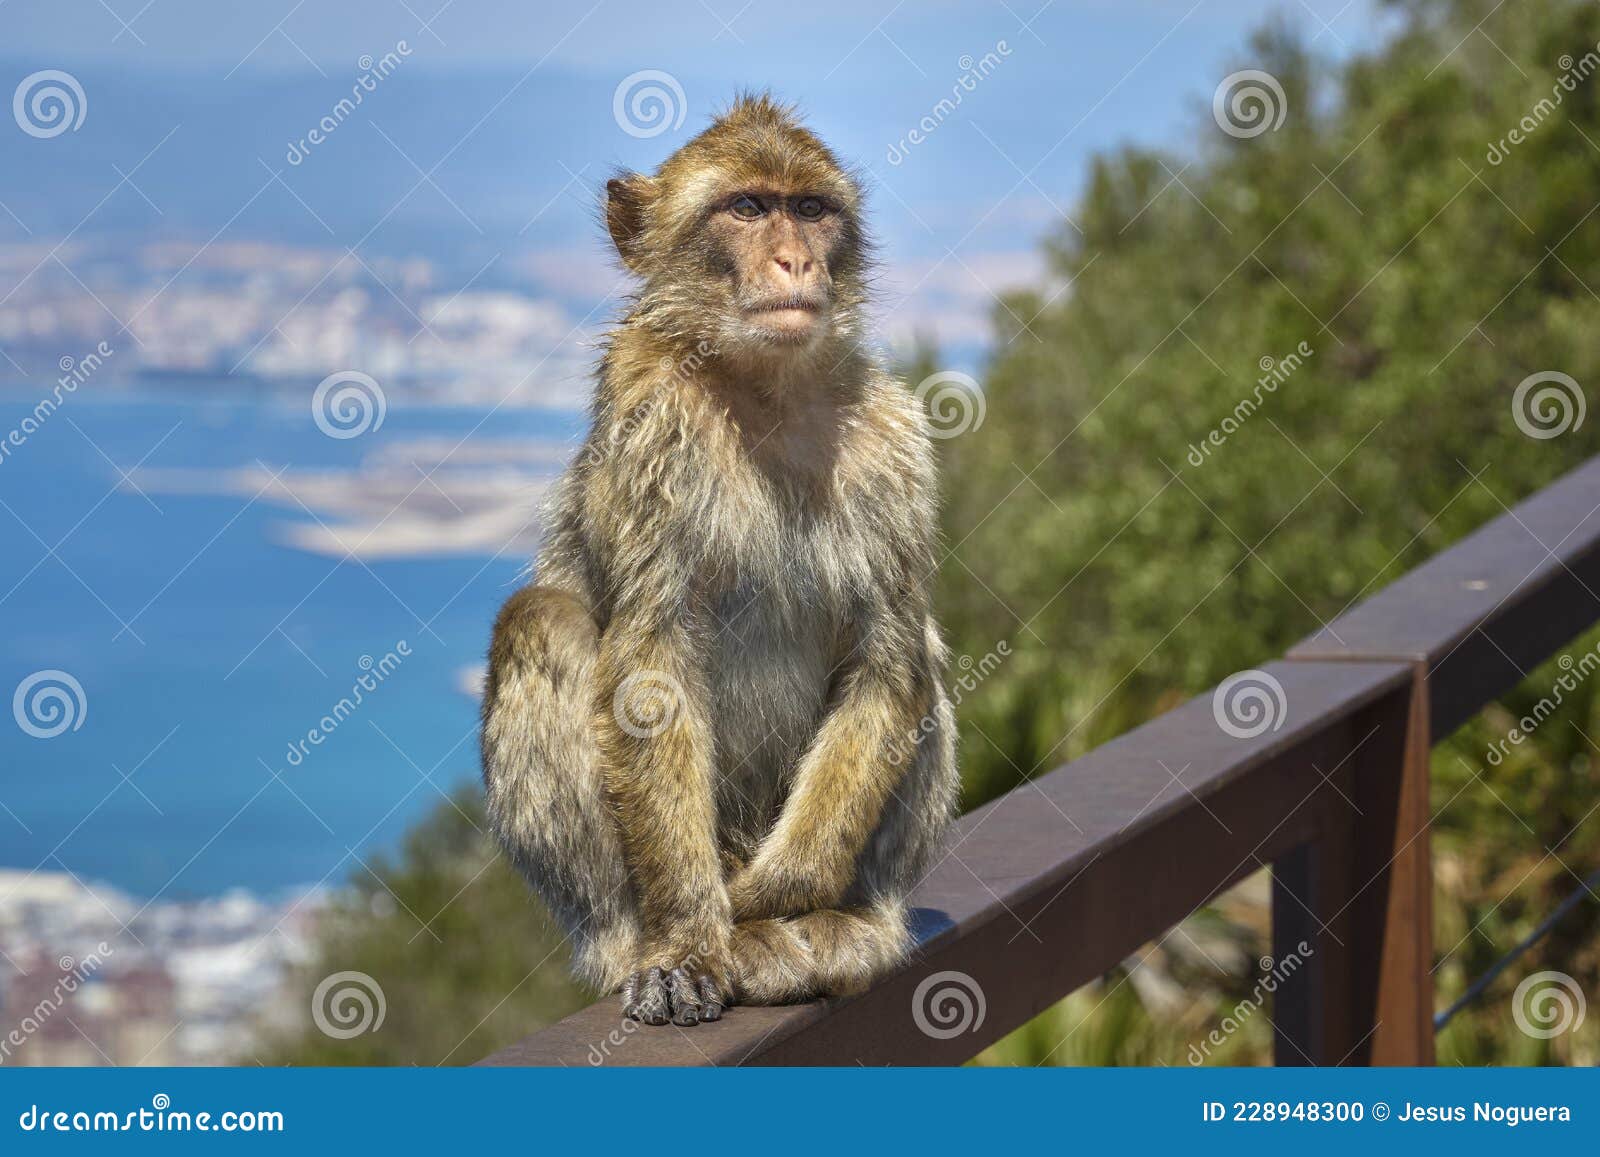 macaques in the rock of gibraltar. british territory